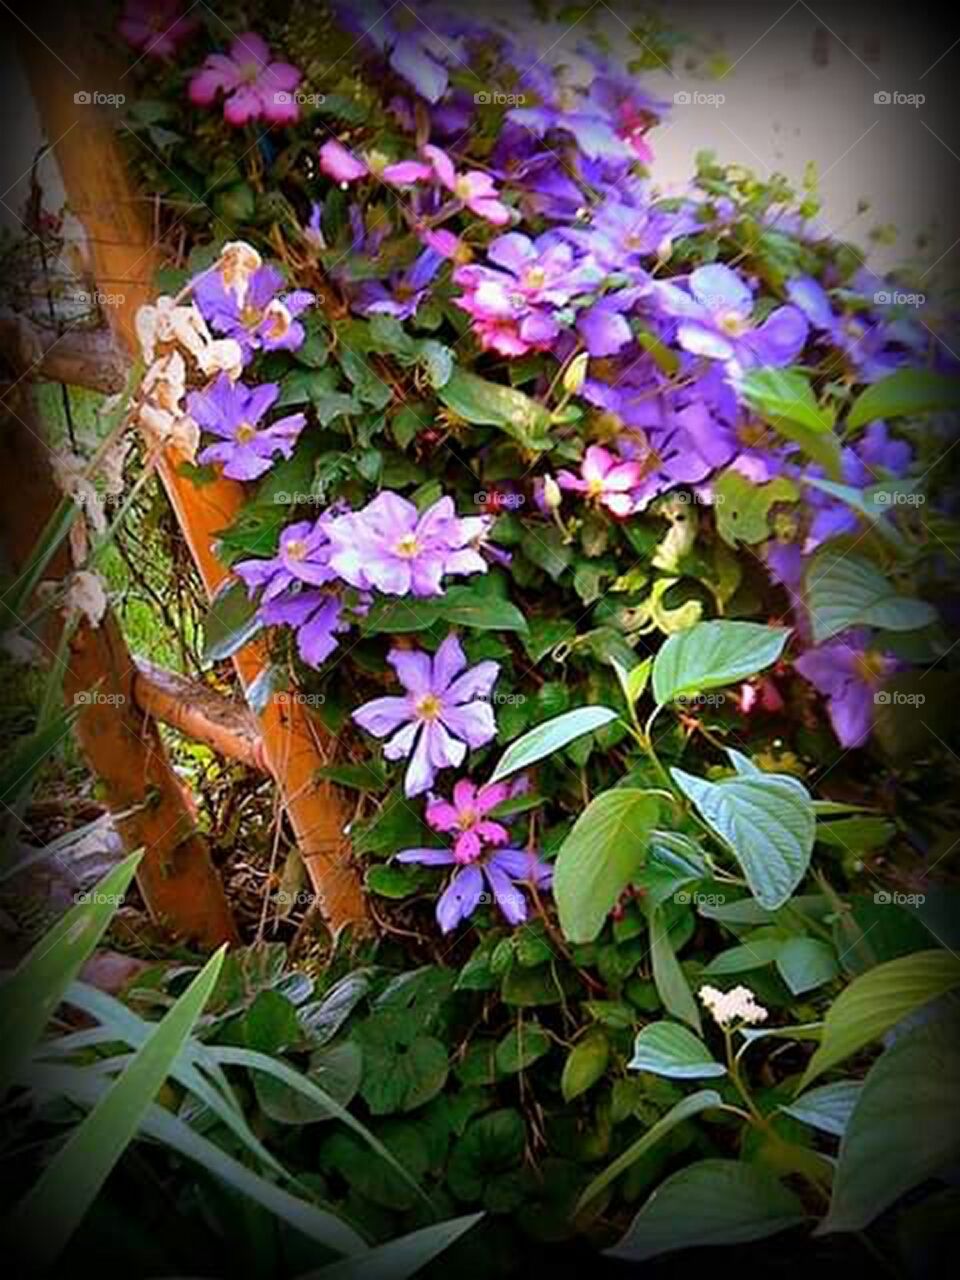 image of colorful purple flowers and green foliage cascading down a wooden ladder